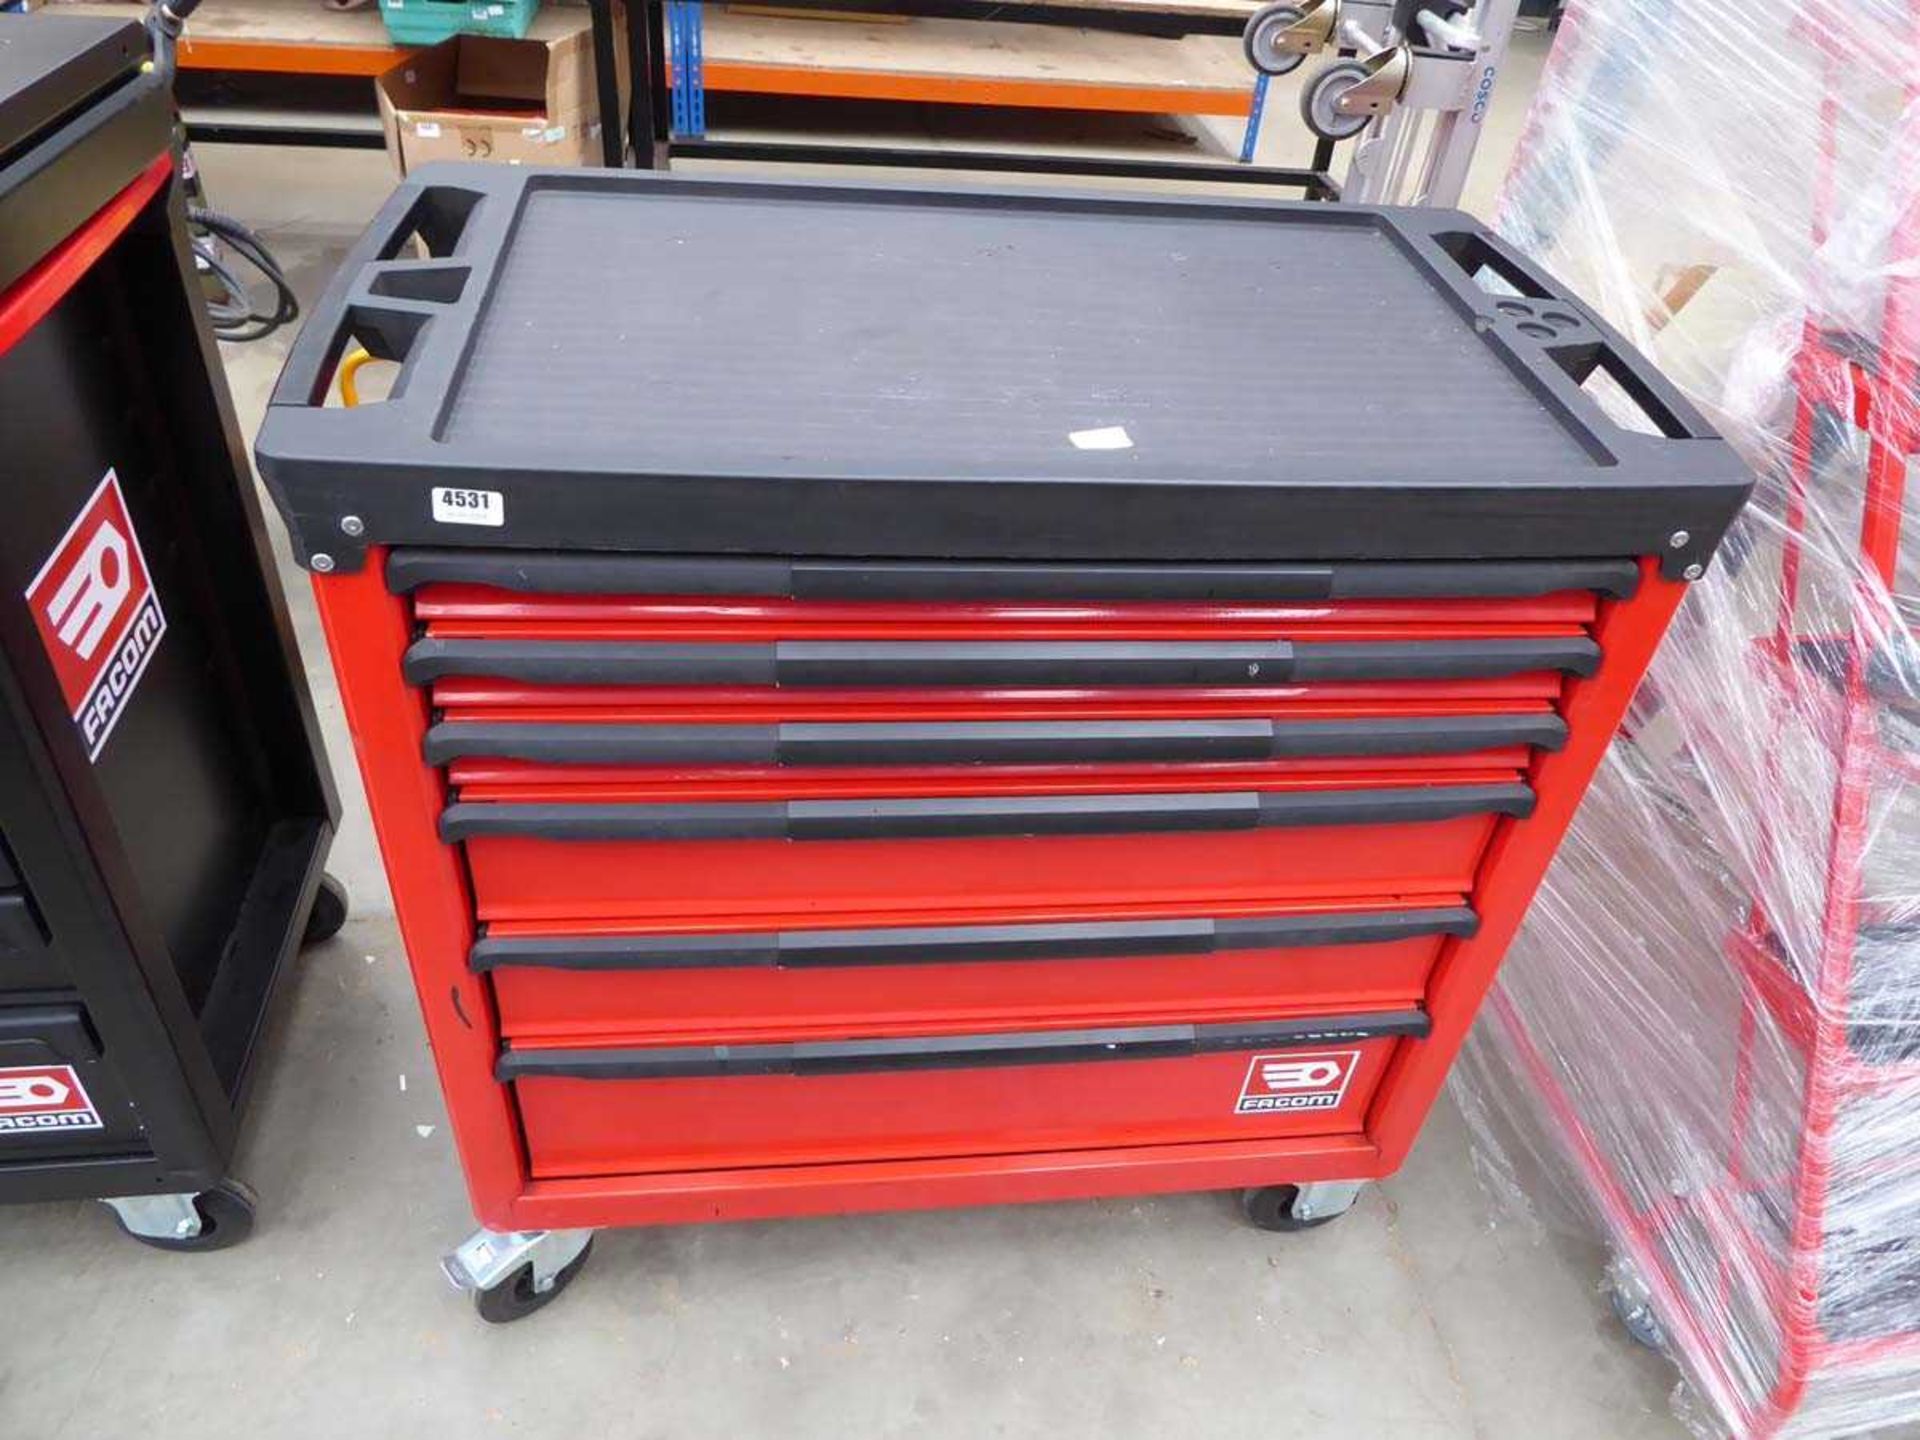 Red Facom wheeled drawered toolbox